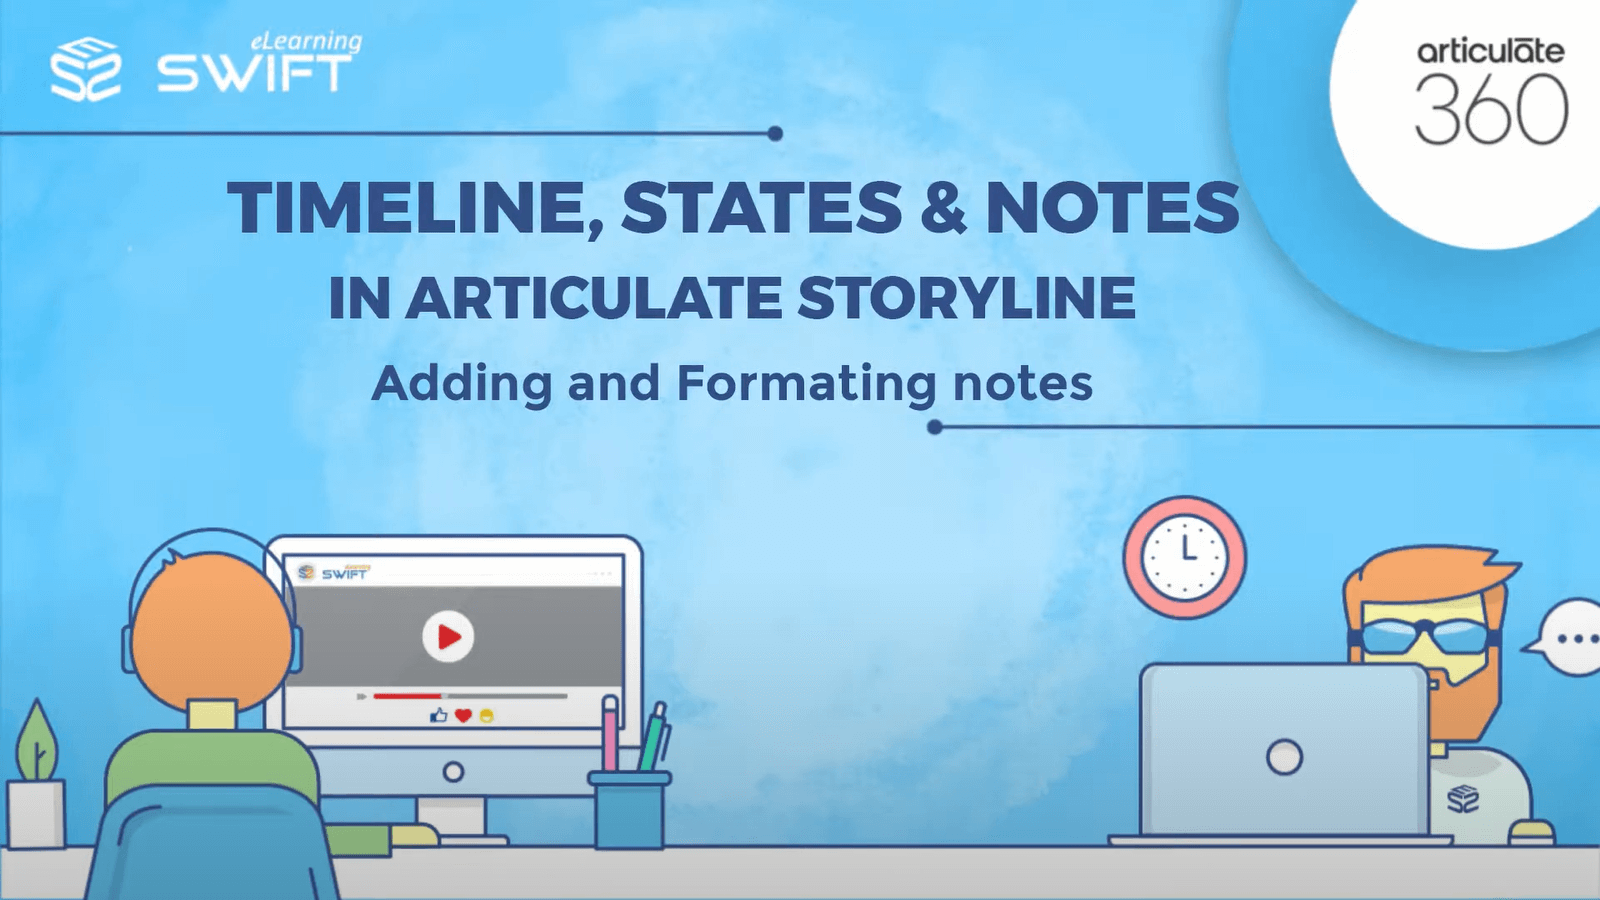 Adding and Formatting Slide Notes